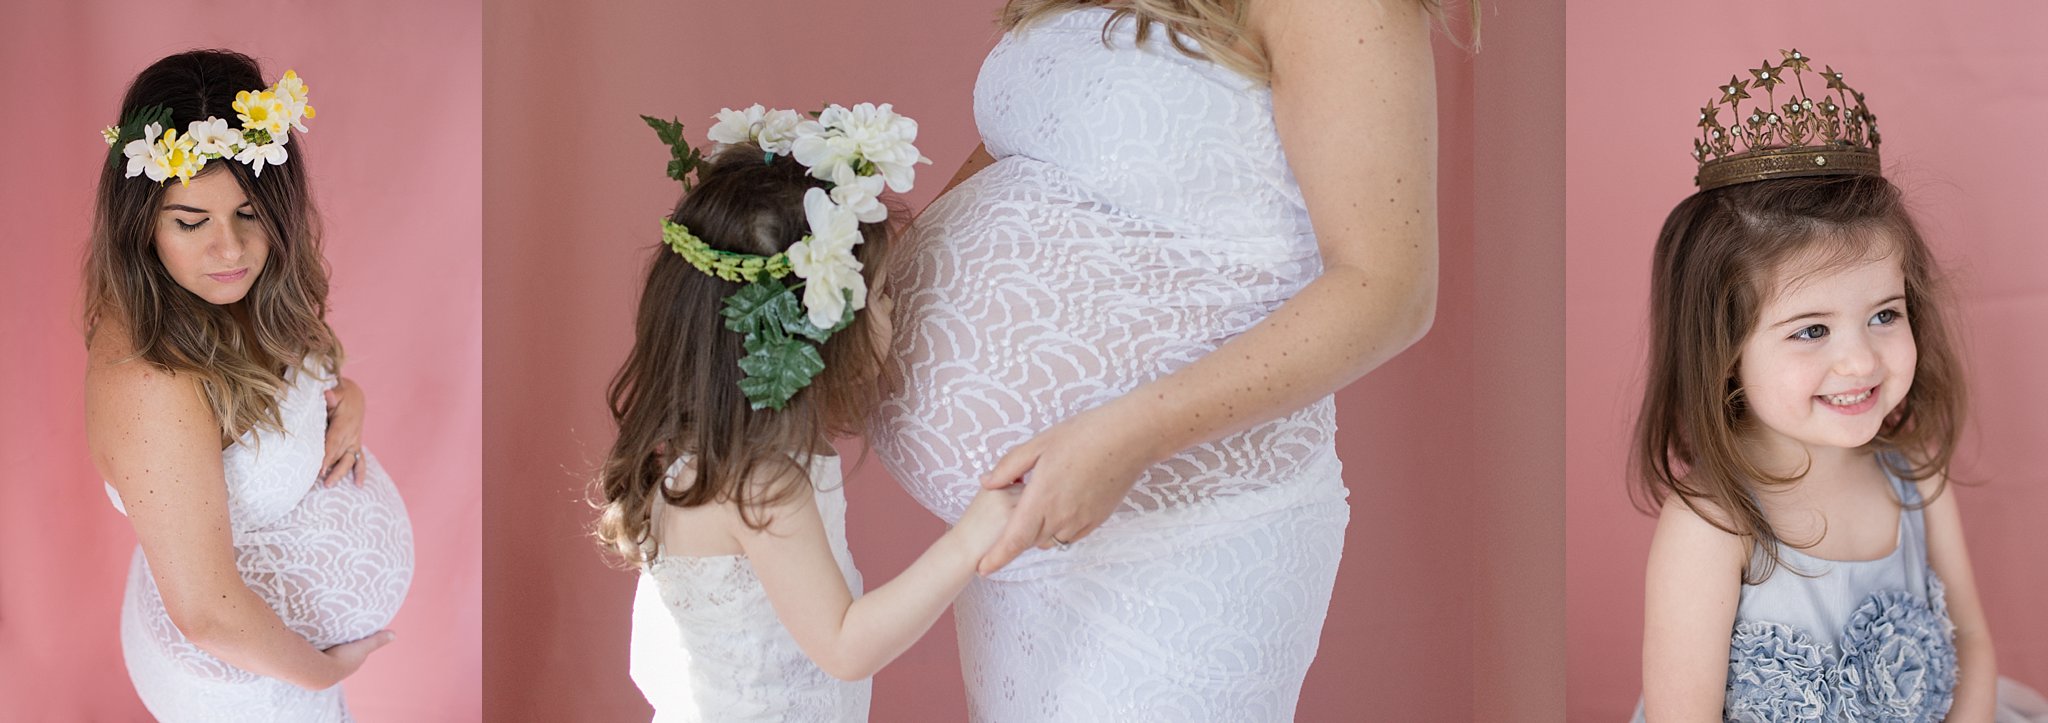 Jennifer Blaak Photography, Hamilton Maternity Photographer, Mother and Daughter, Matching White Lace Dresses, Flower Crowns